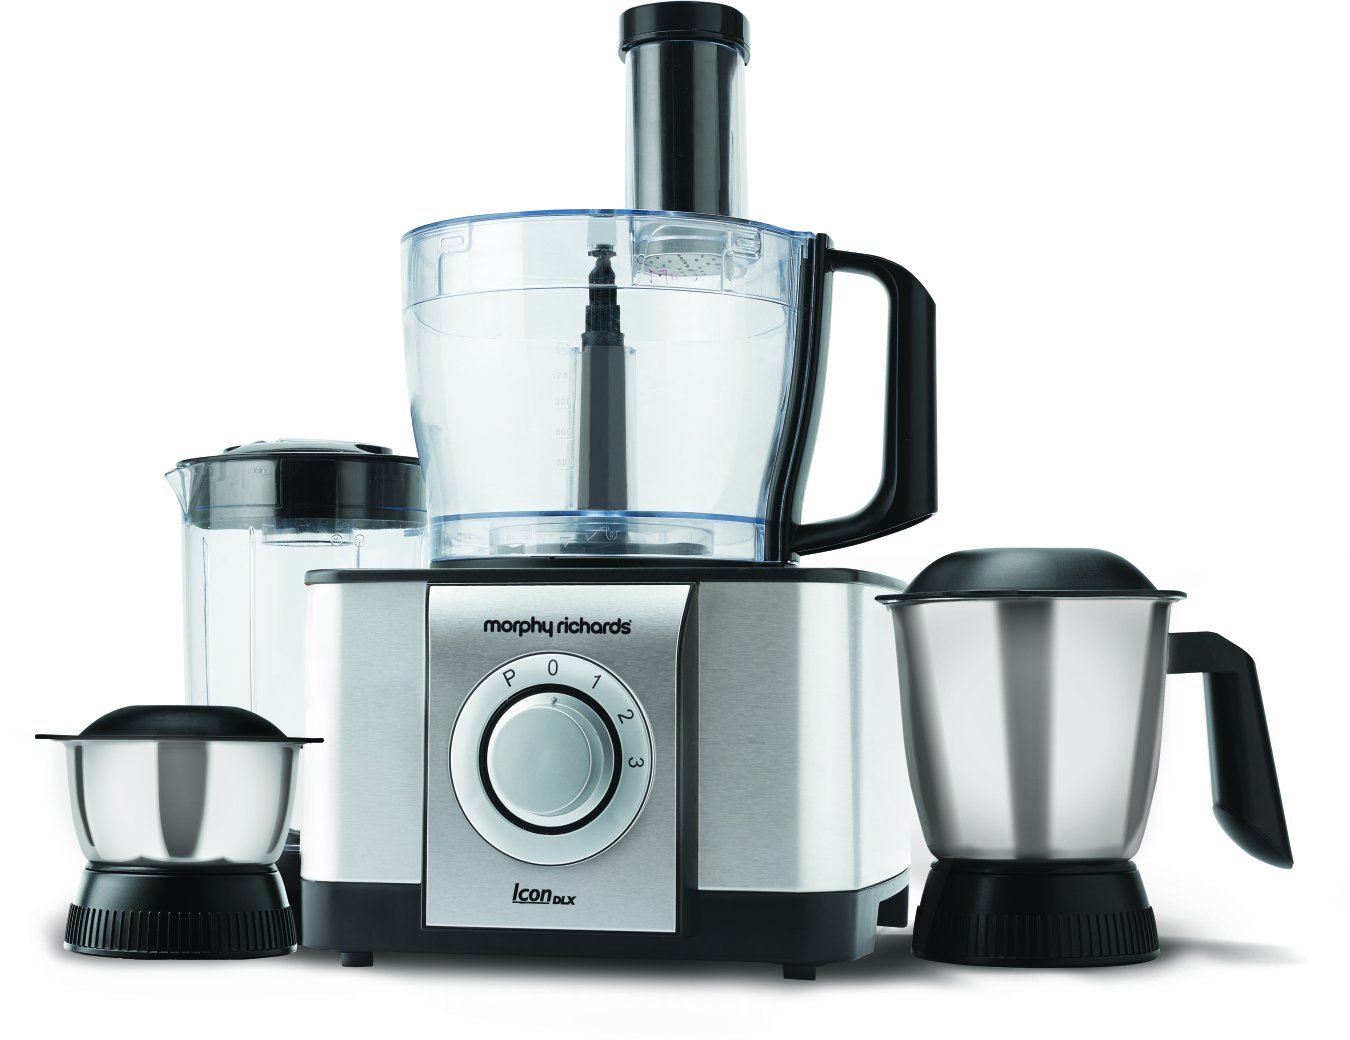 MORPHY RICHARDS ICON DLX FOOD PROCESSOR Reviews MORPHY RICHARDS